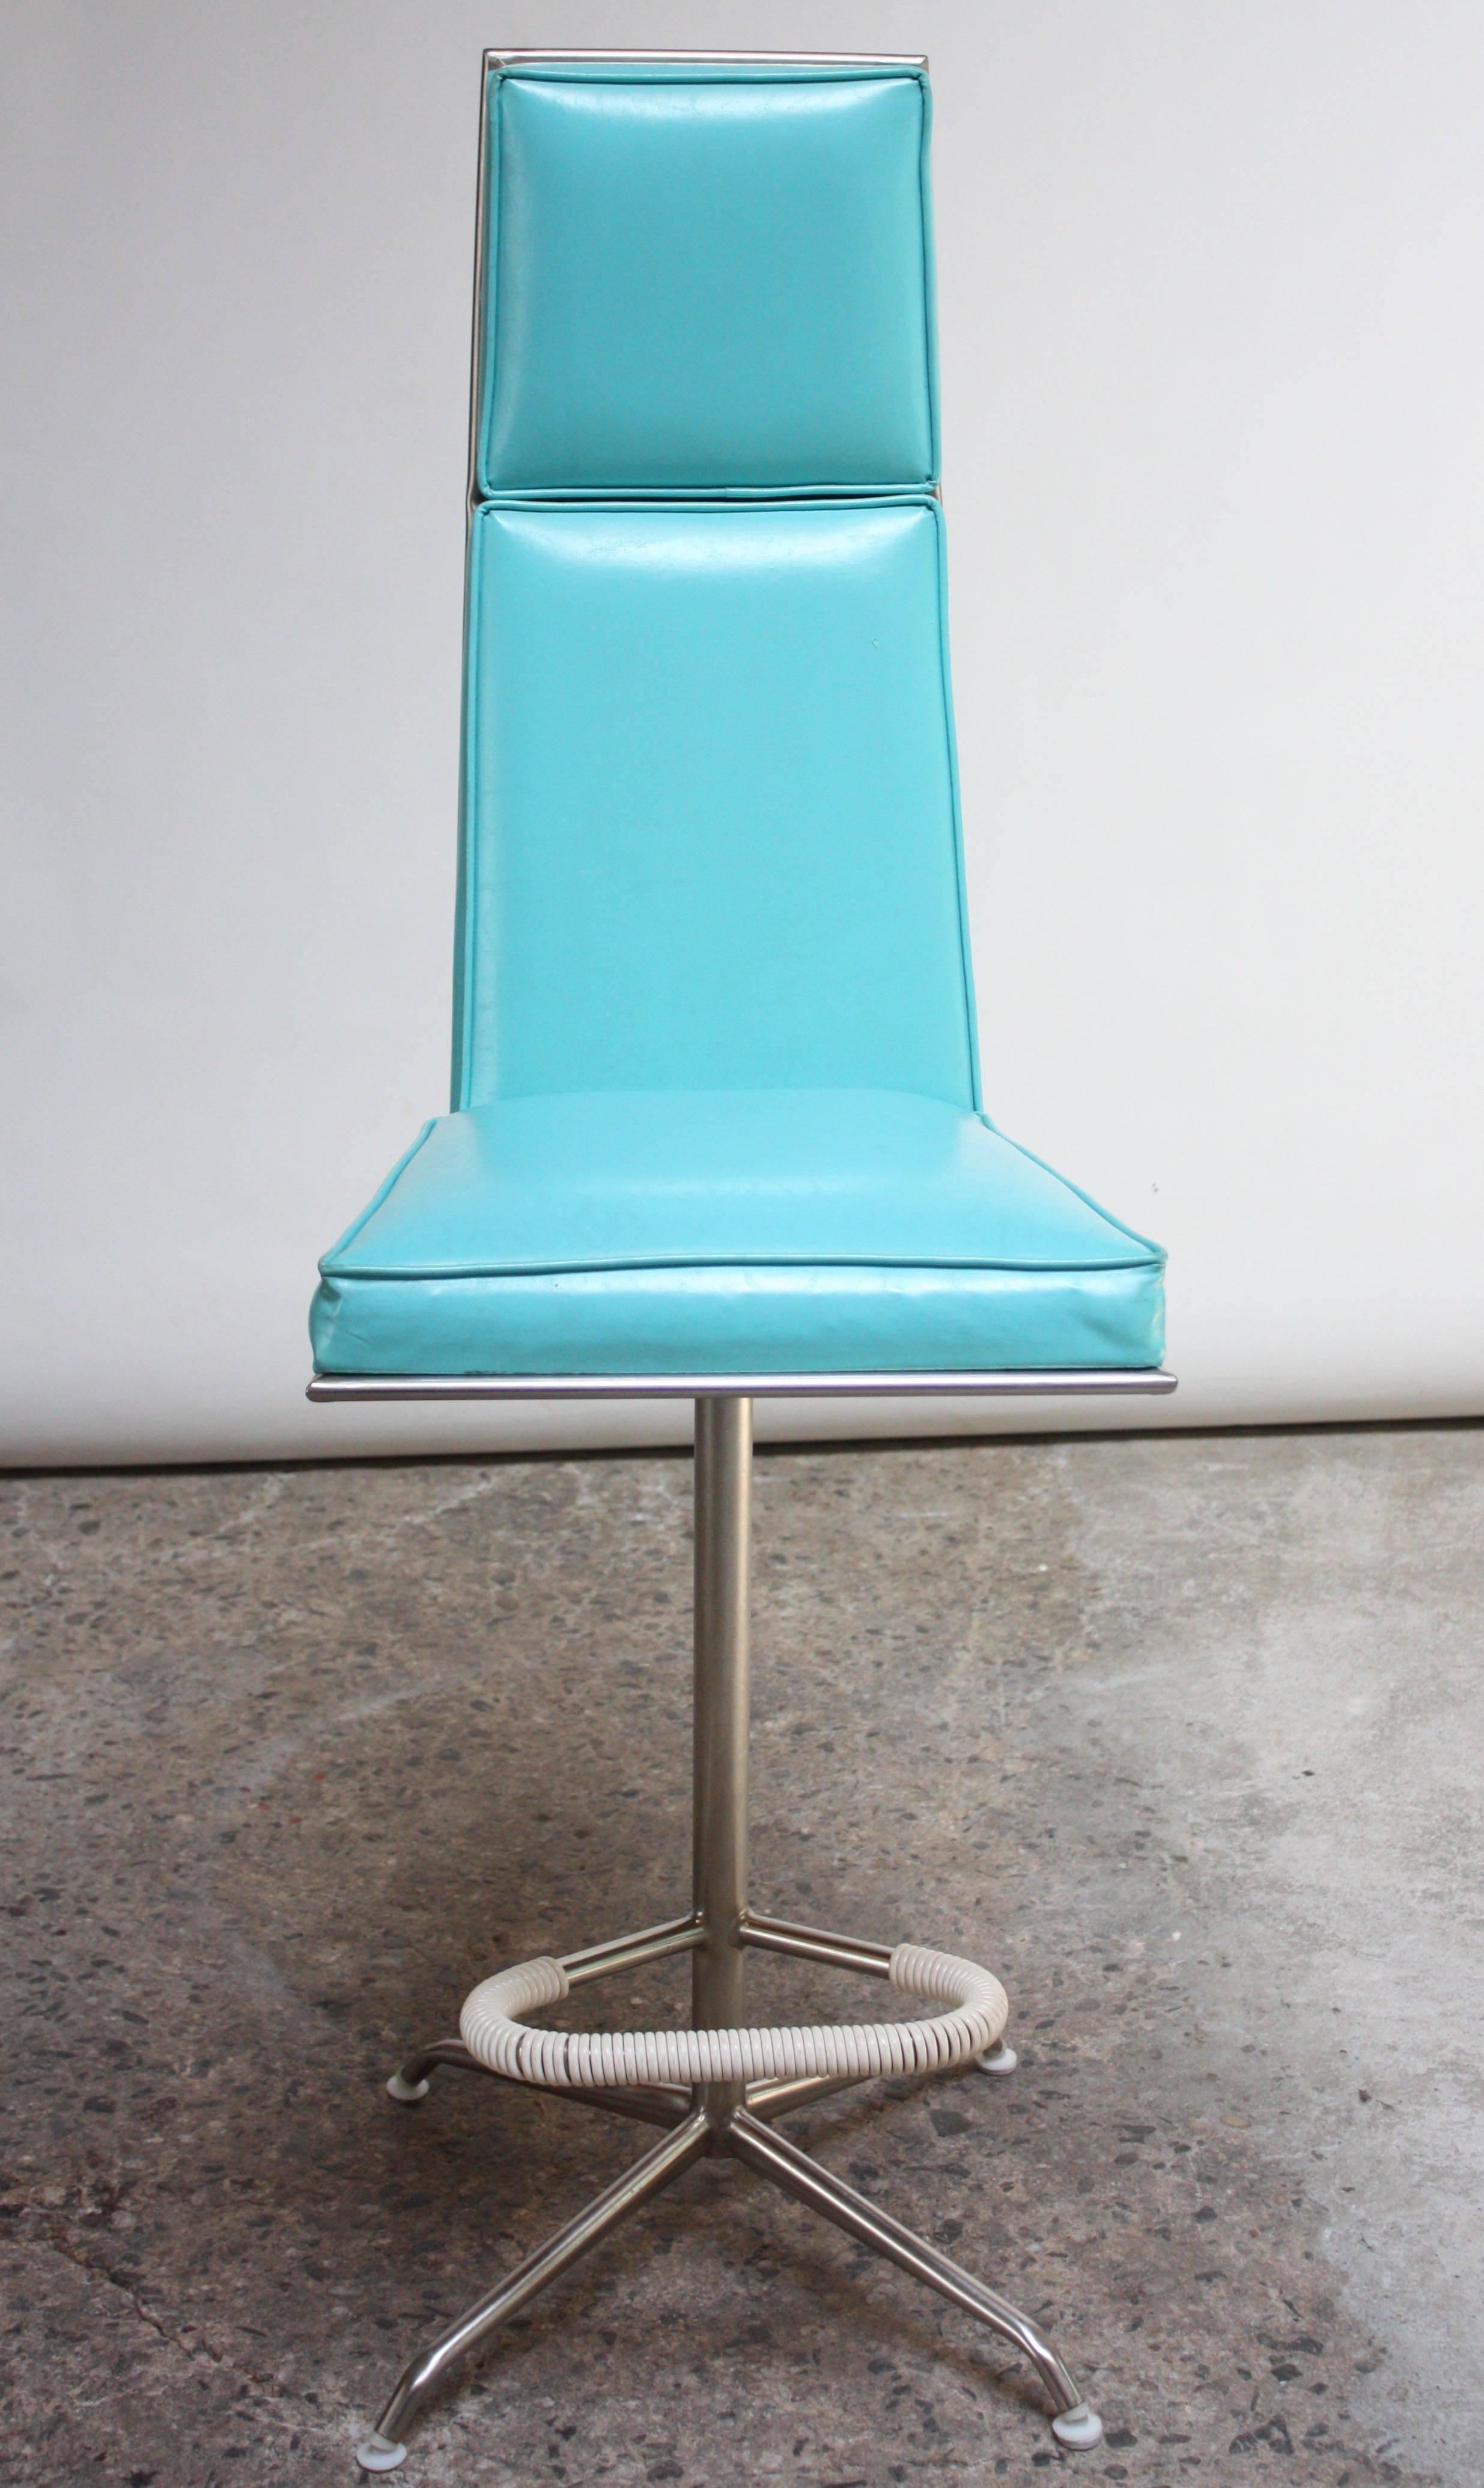 Mid-20th Century Set of Three American Modern High-Back Barstools by Jansko For Sale